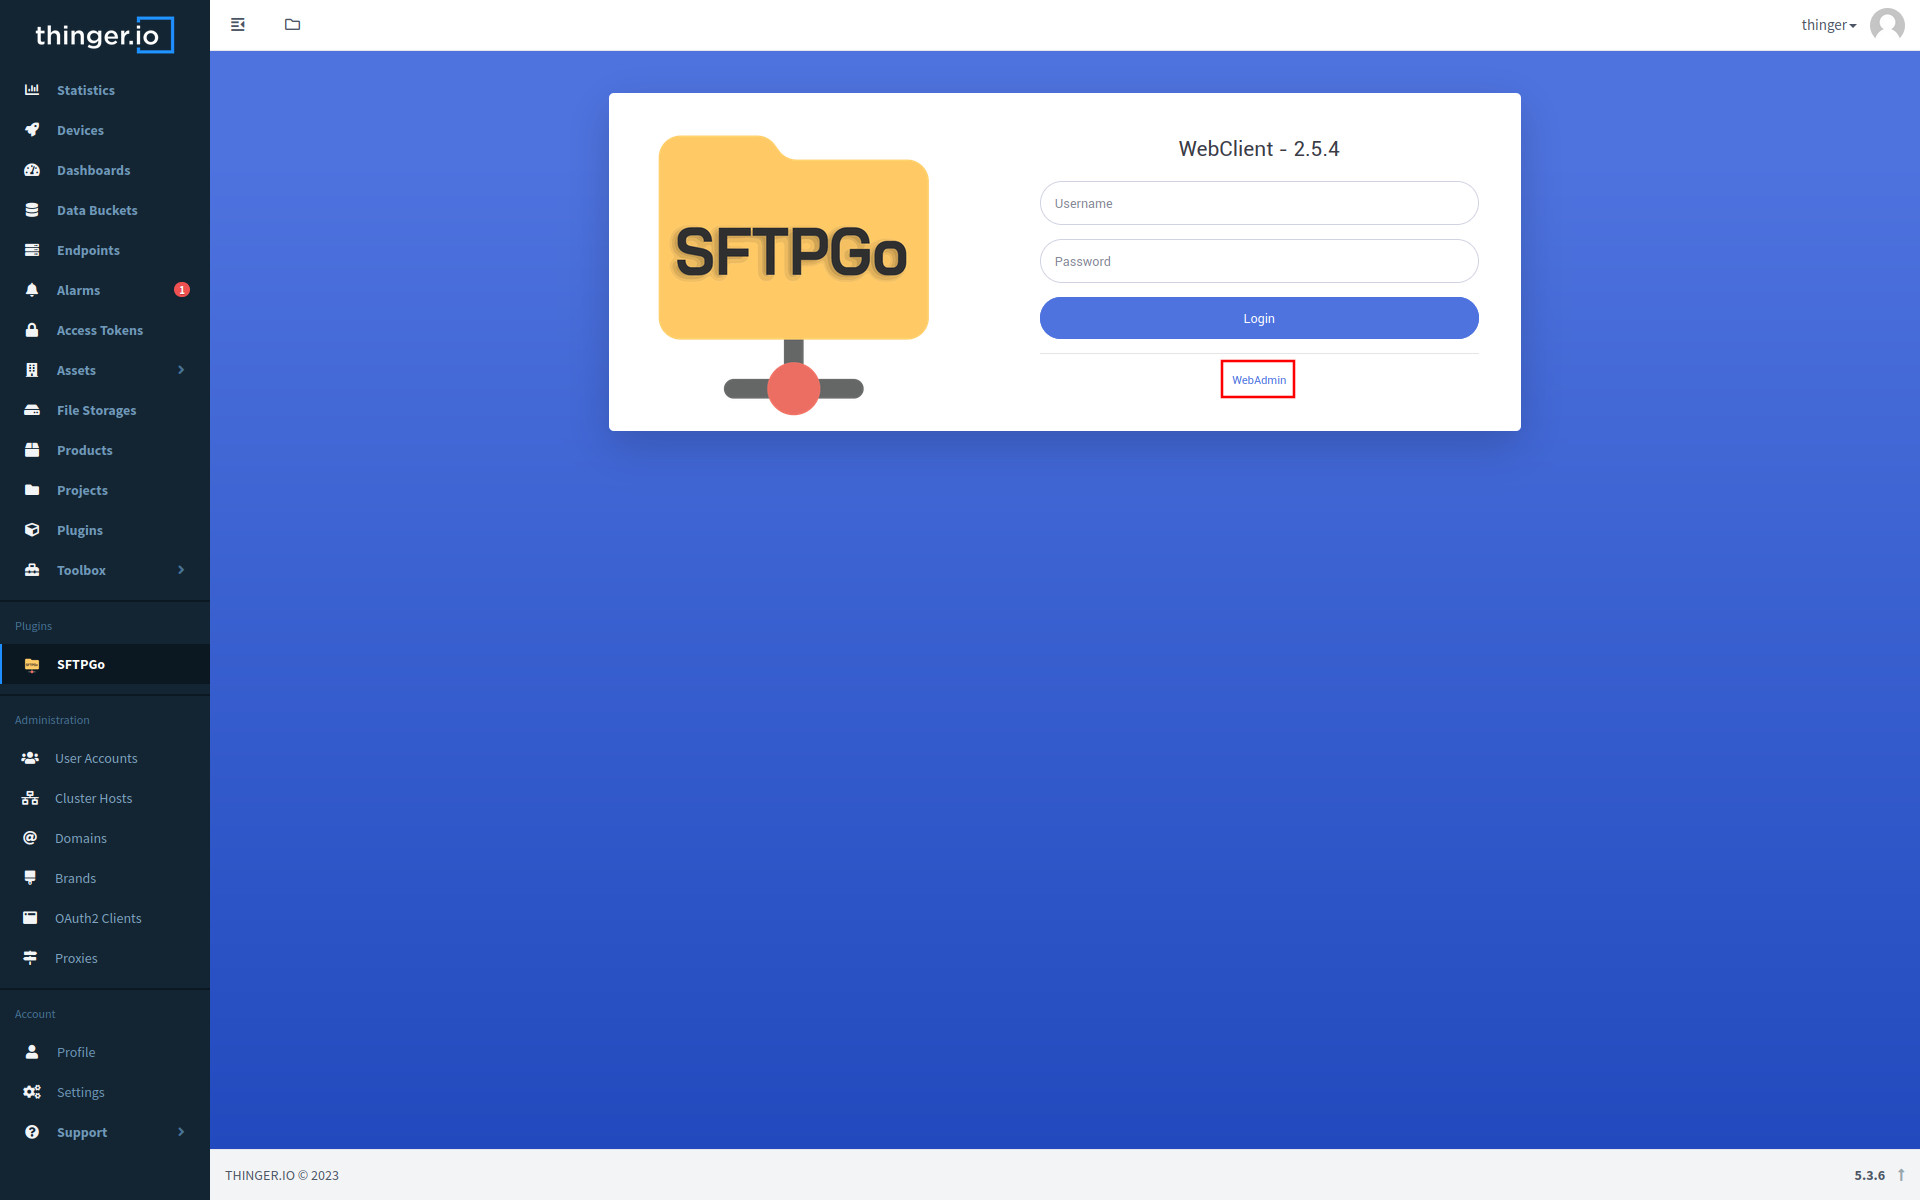 SFTPGo WebClient marking how to access the WebAdmin